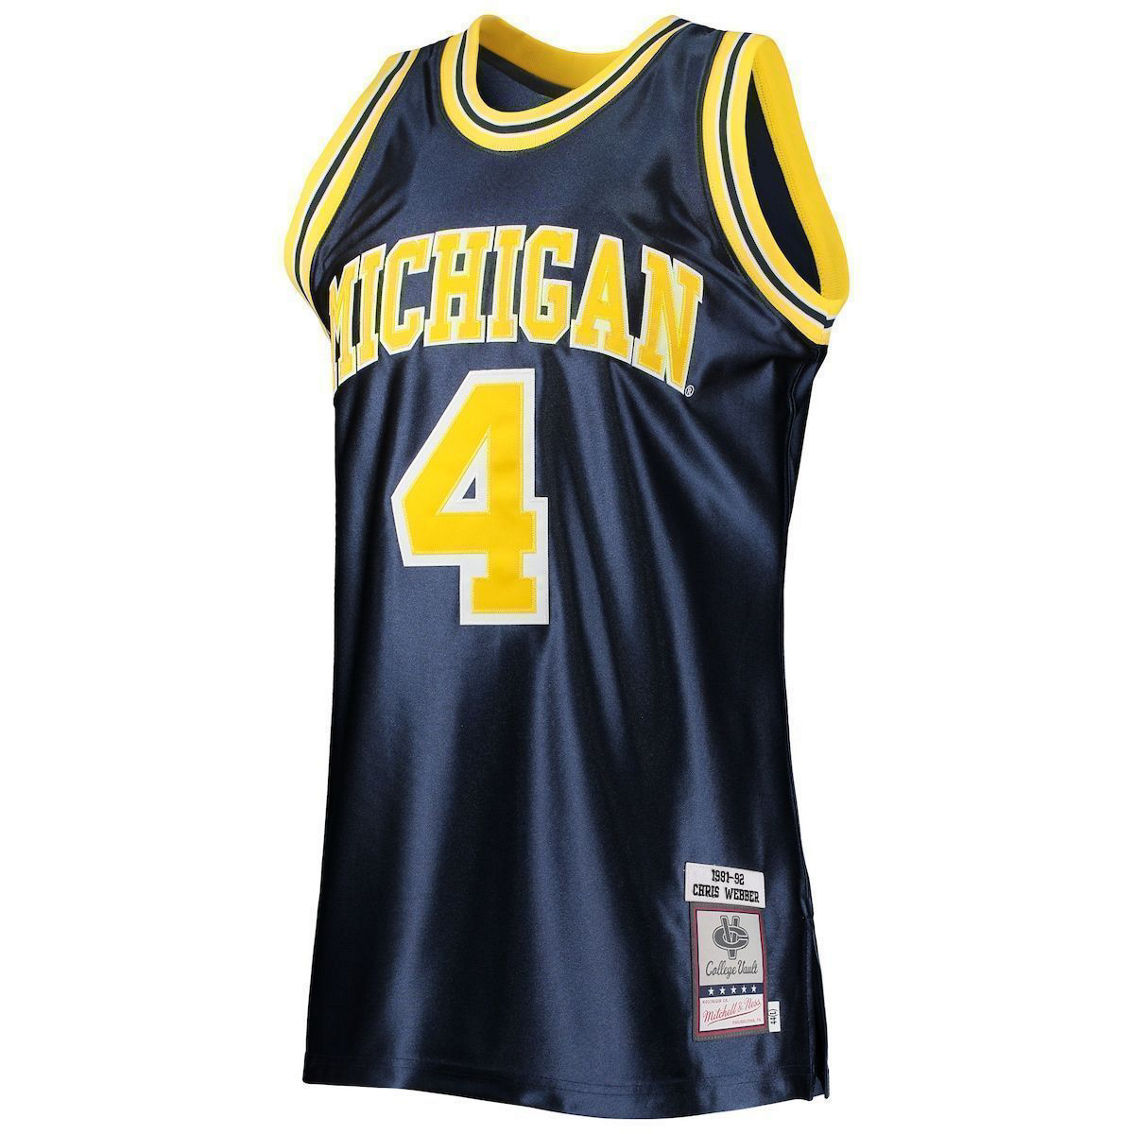 Mitchell & Ness Men's Chris Webber Navy Michigan Wolverines 1991/92 Authentic Throwback College Jersey - Image 3 of 4